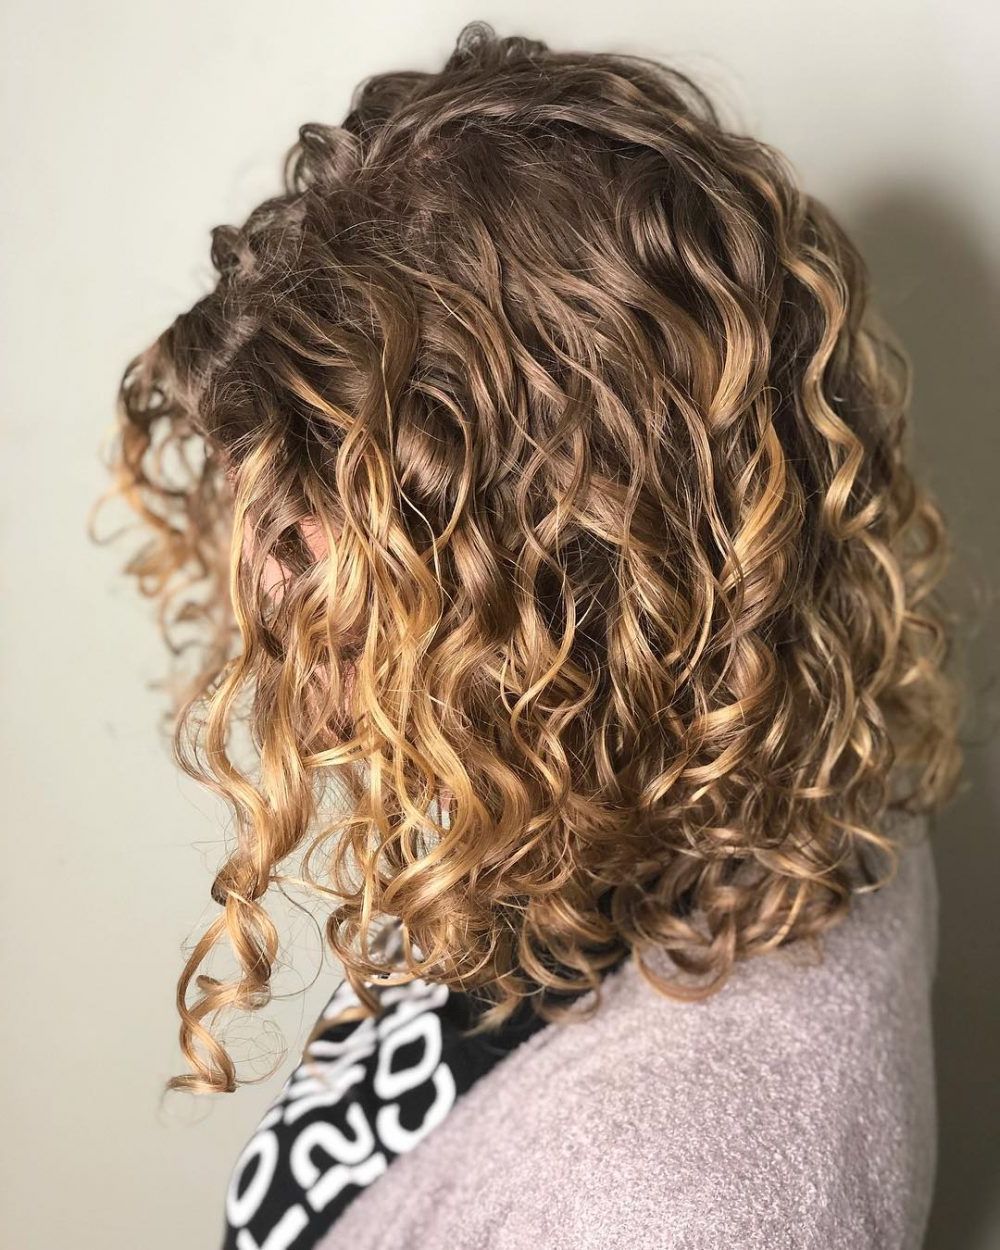 30 Gorgeous Medium Length Curly Hairstyles For Women In 2019 With Regard To Newest Medium Haircuts For Very Curly Hair (View 7 of 20)